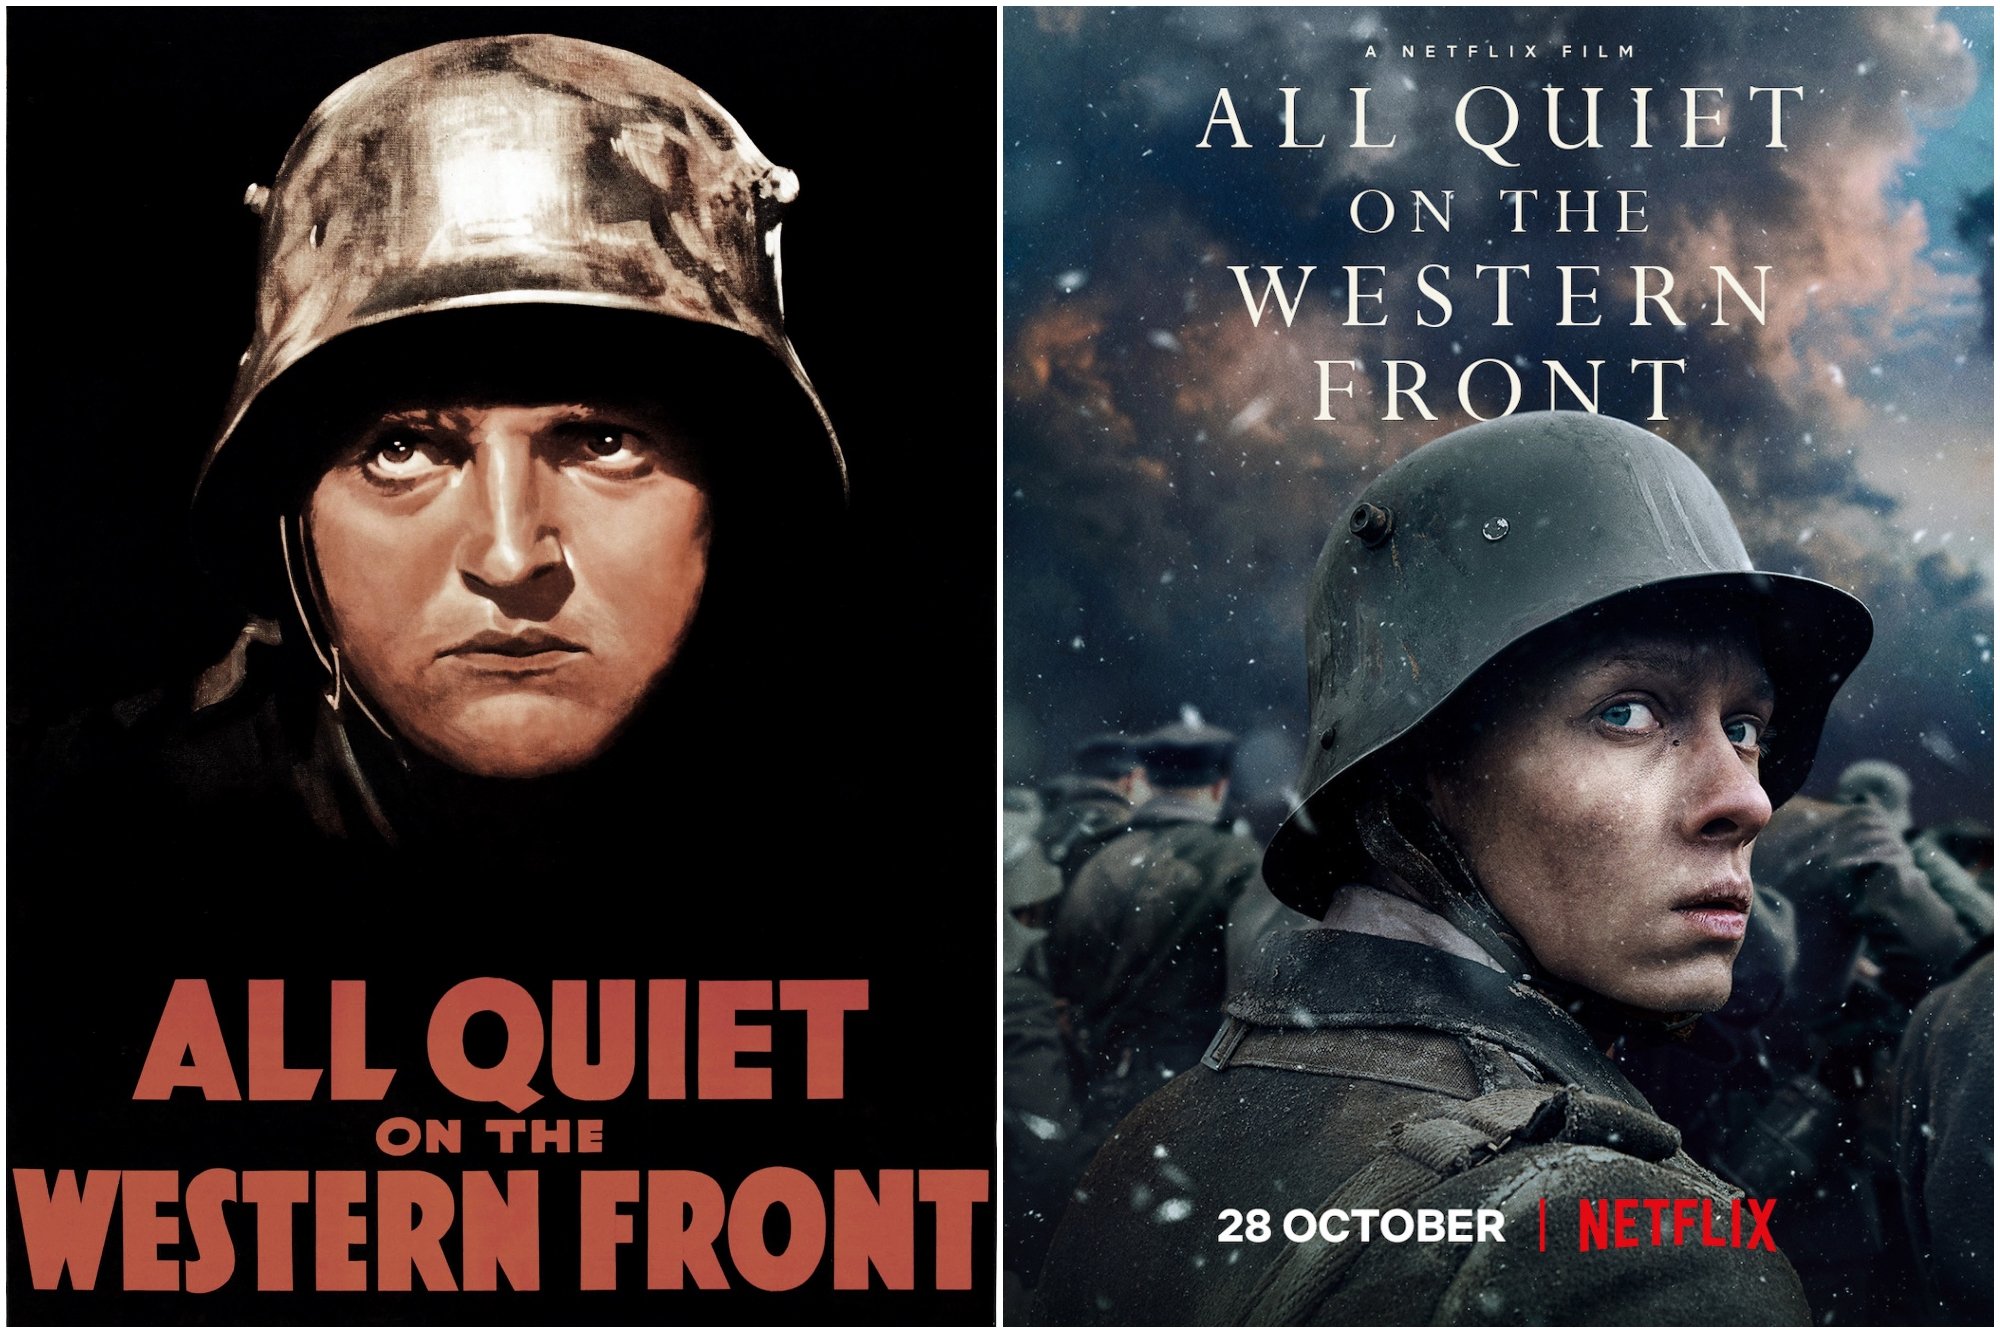 'All Quiet on the Western Front' different posters from 1930 and 2022 adaptations